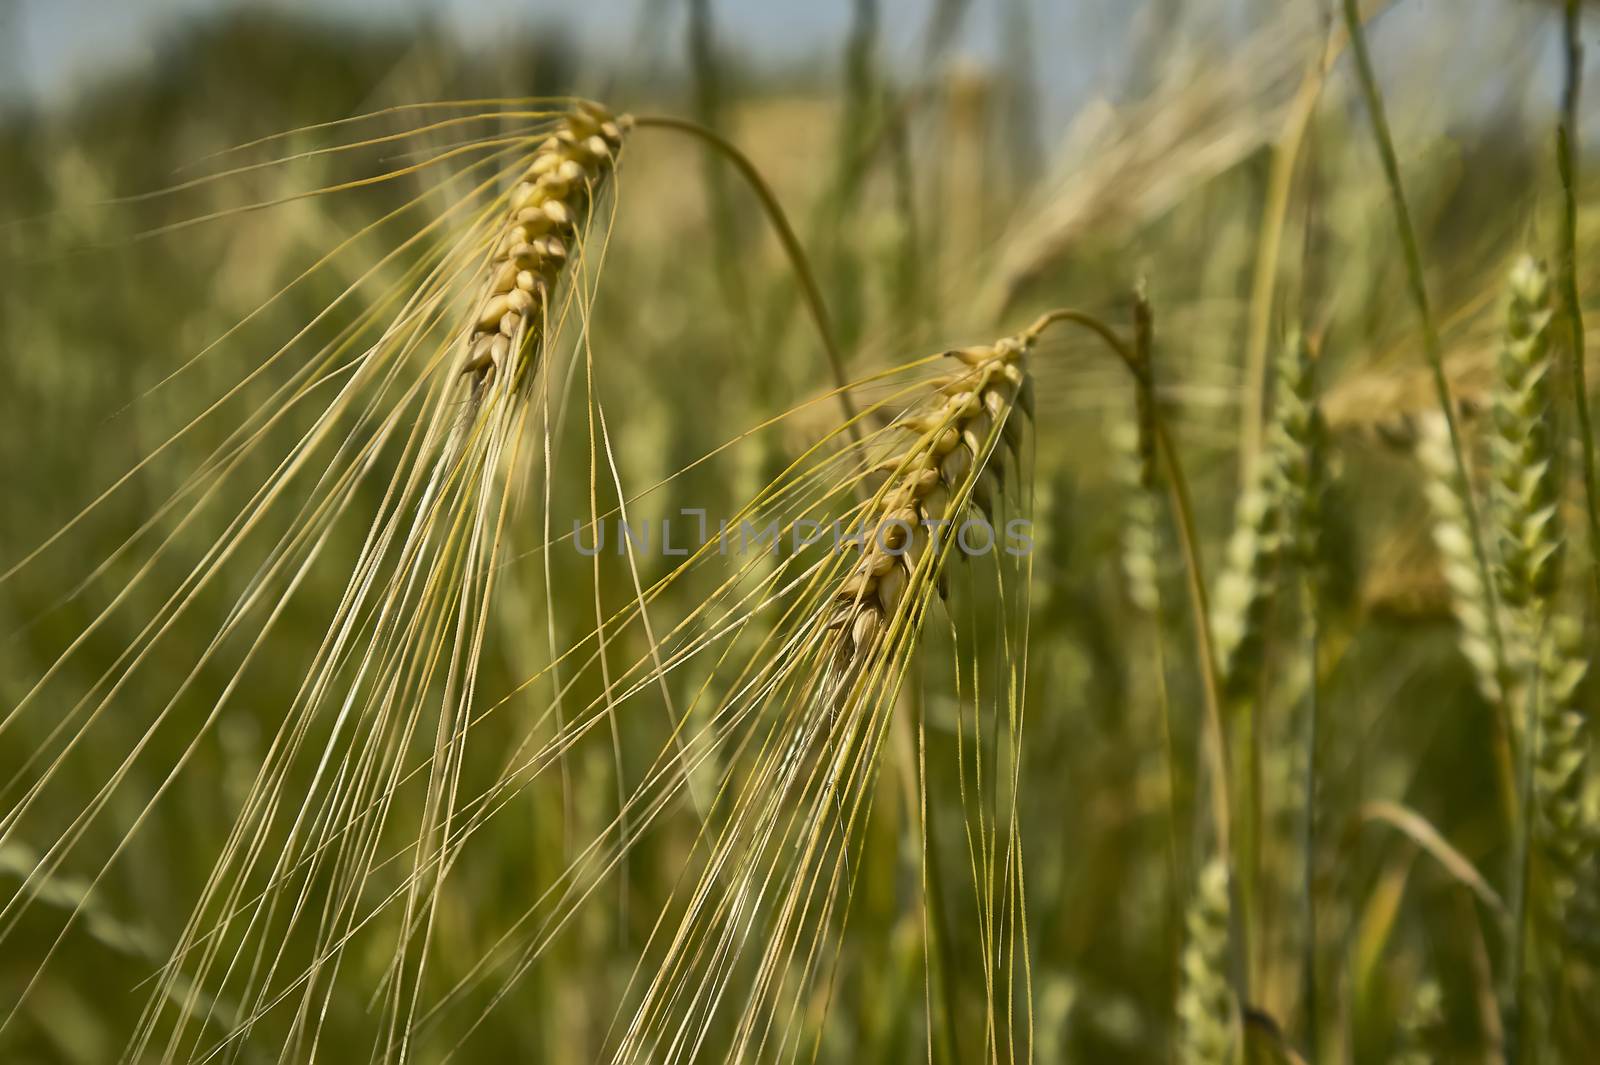 Ears of wheat in a field of cultivation, agriculture in italy.